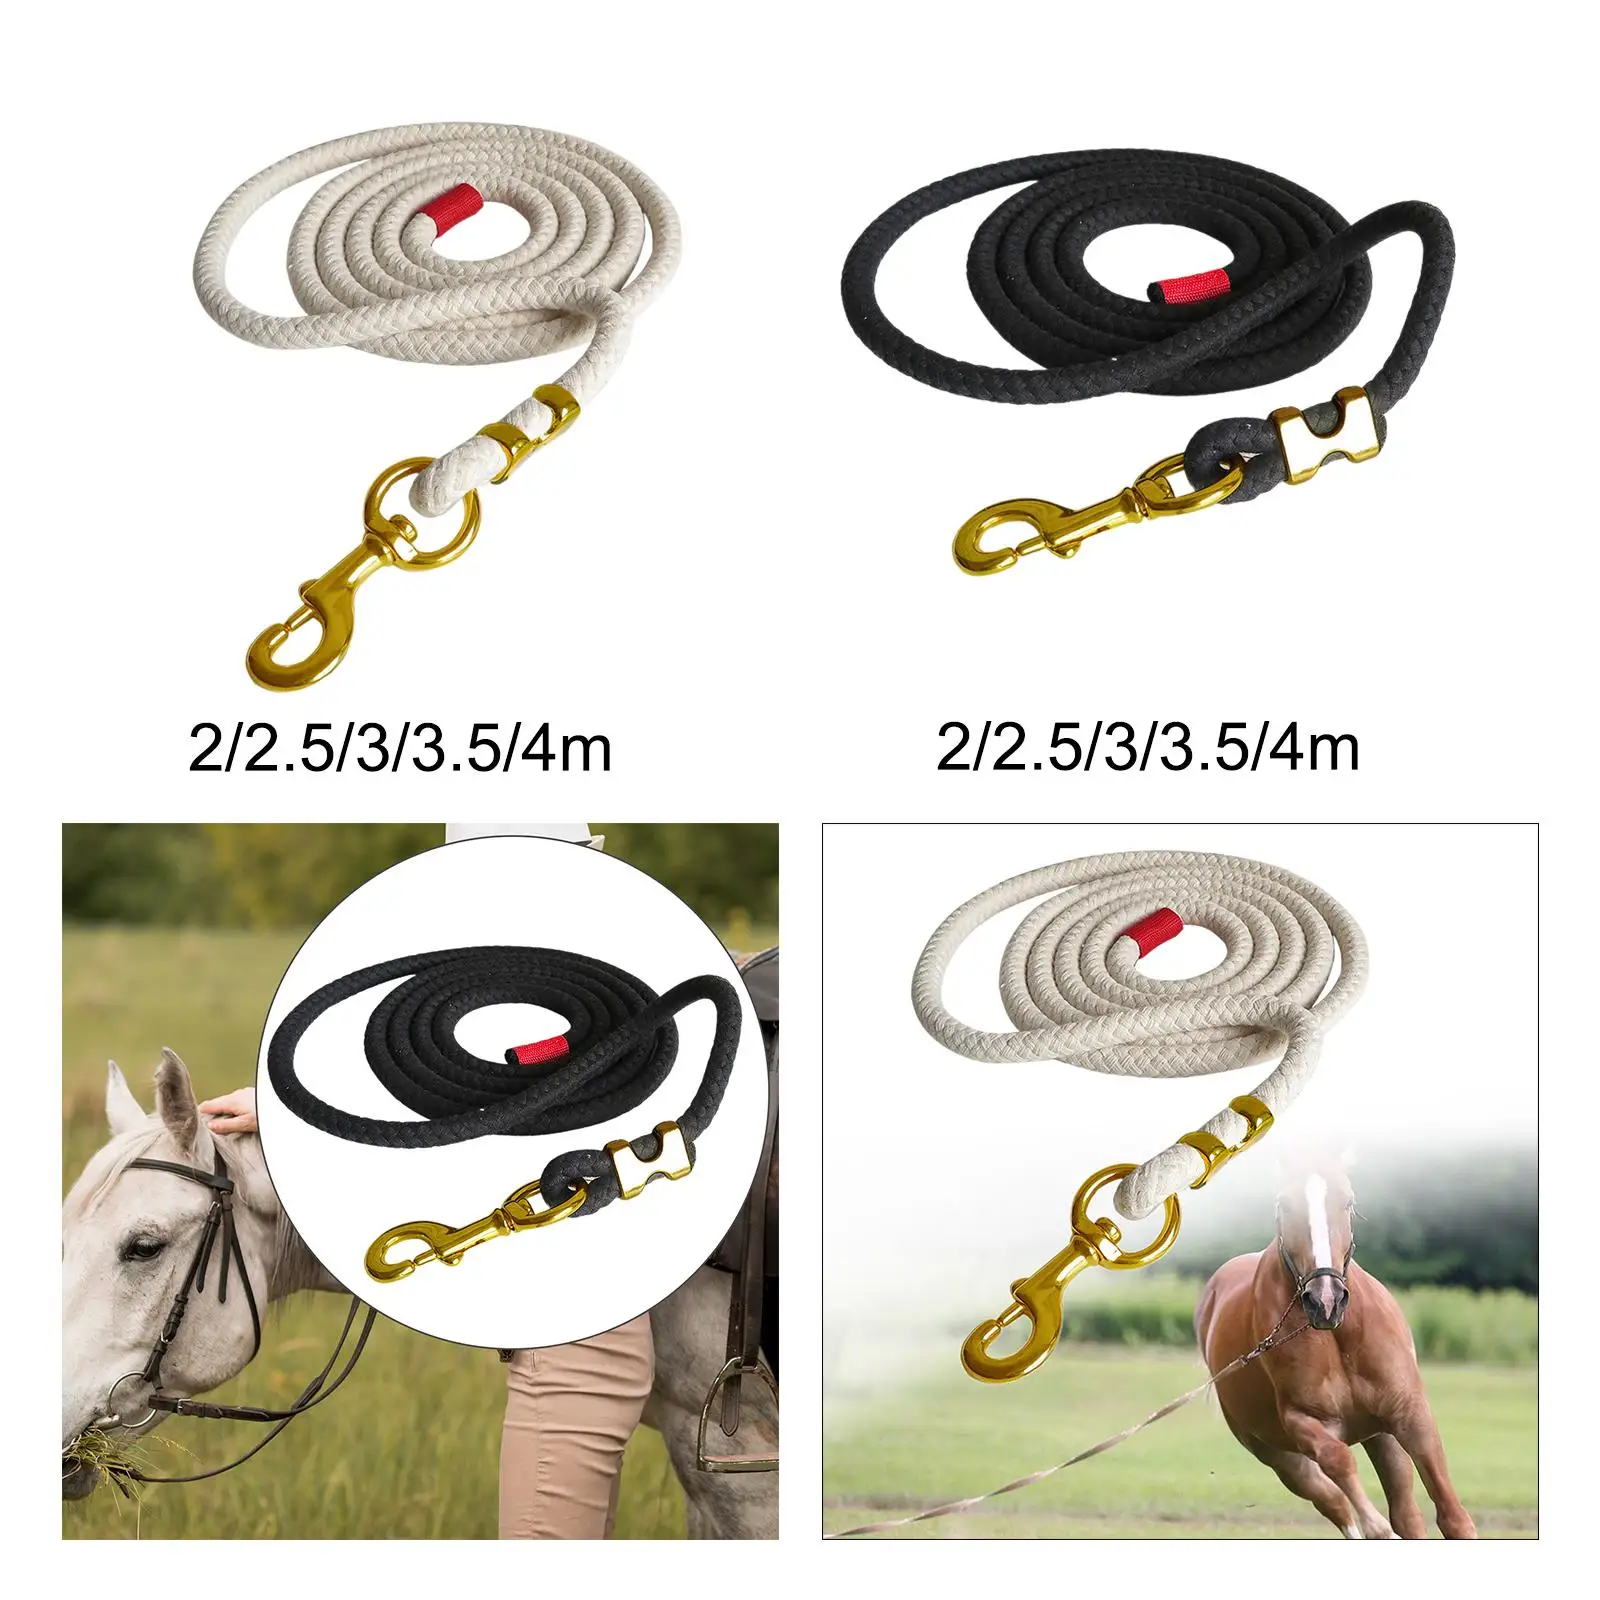 Horse Lead Rope Heavy Duty Long Attach to Halter or Harness for Livestock with Bolt Snap Equestrian Equipment Braided Horse Rope